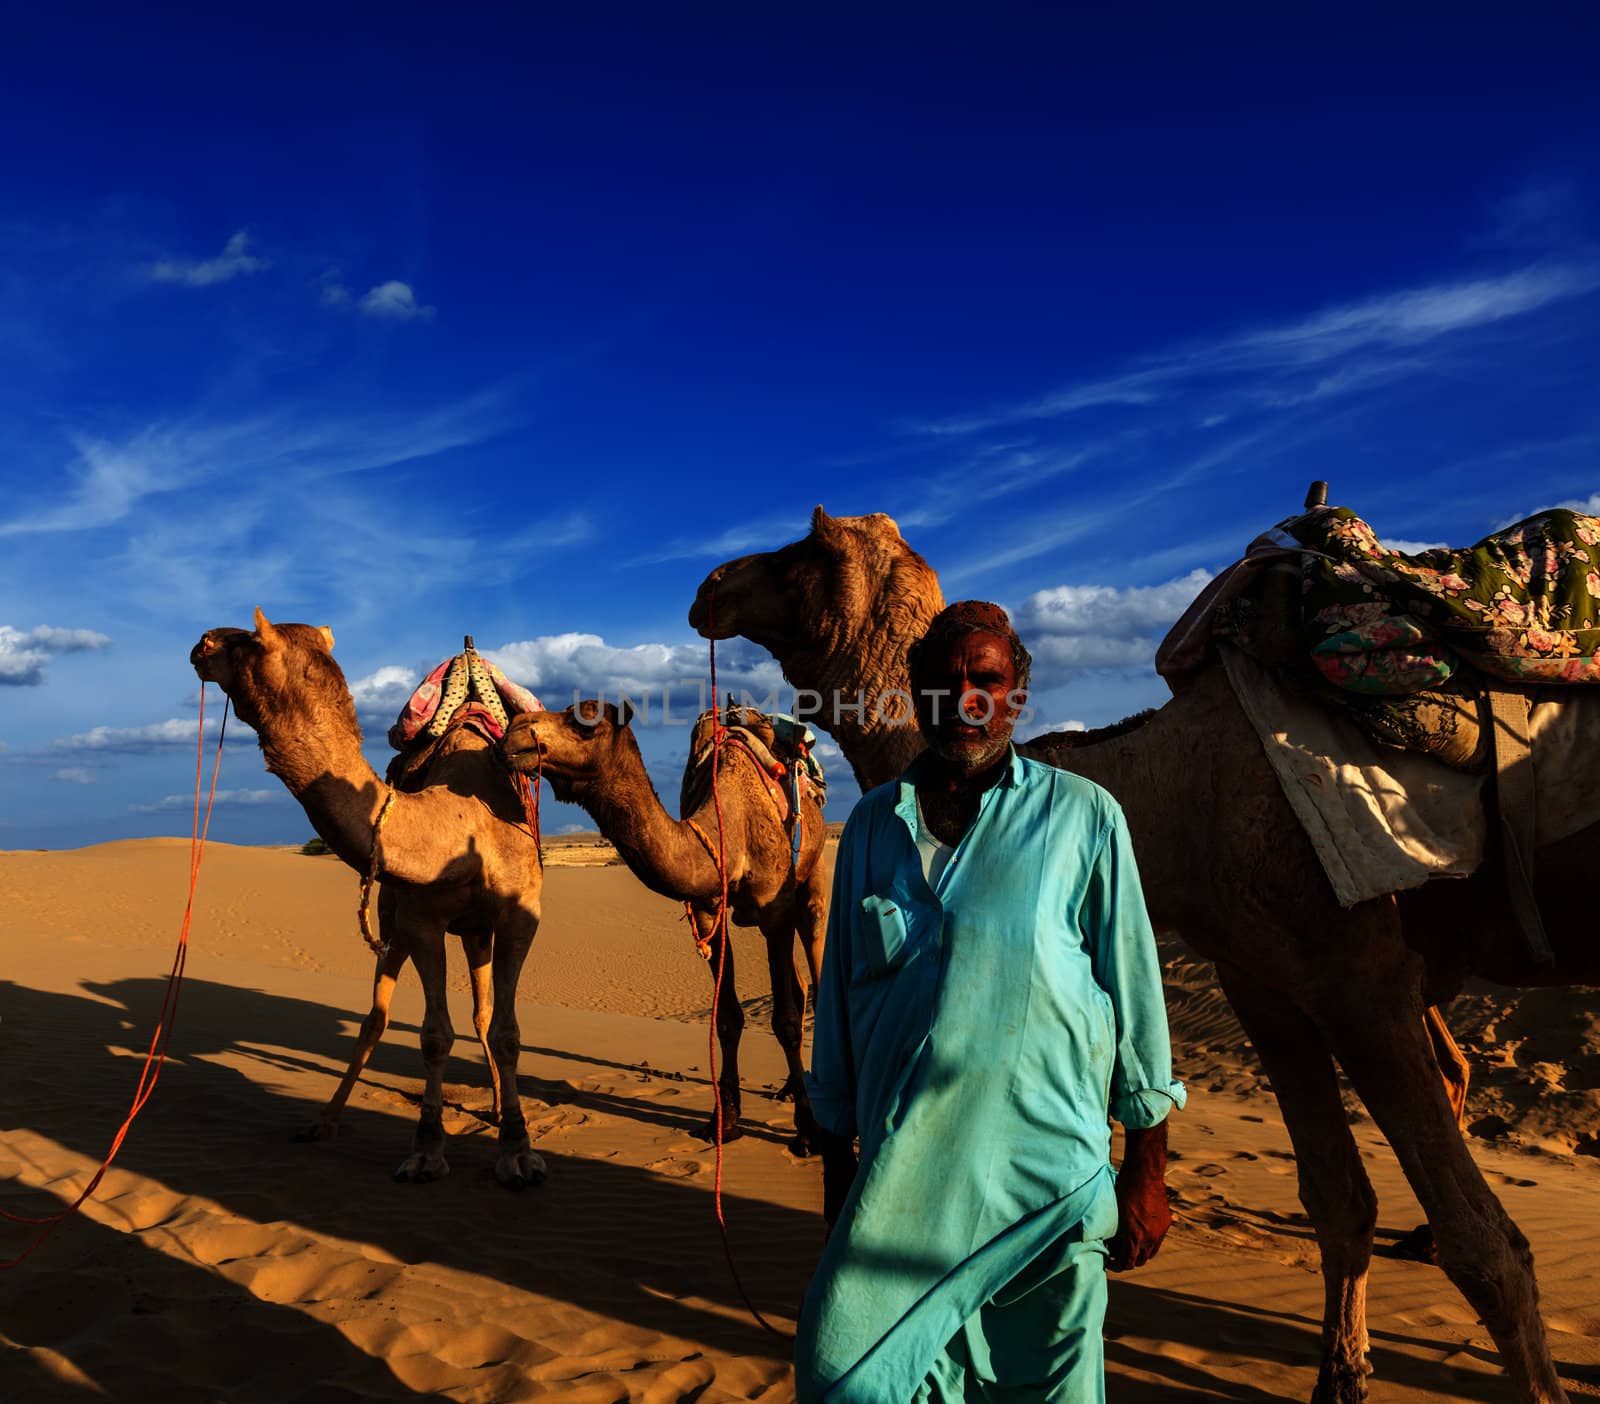 Cameleer (camel driver) with camels in dunes of Thar desert. Raj by dimol